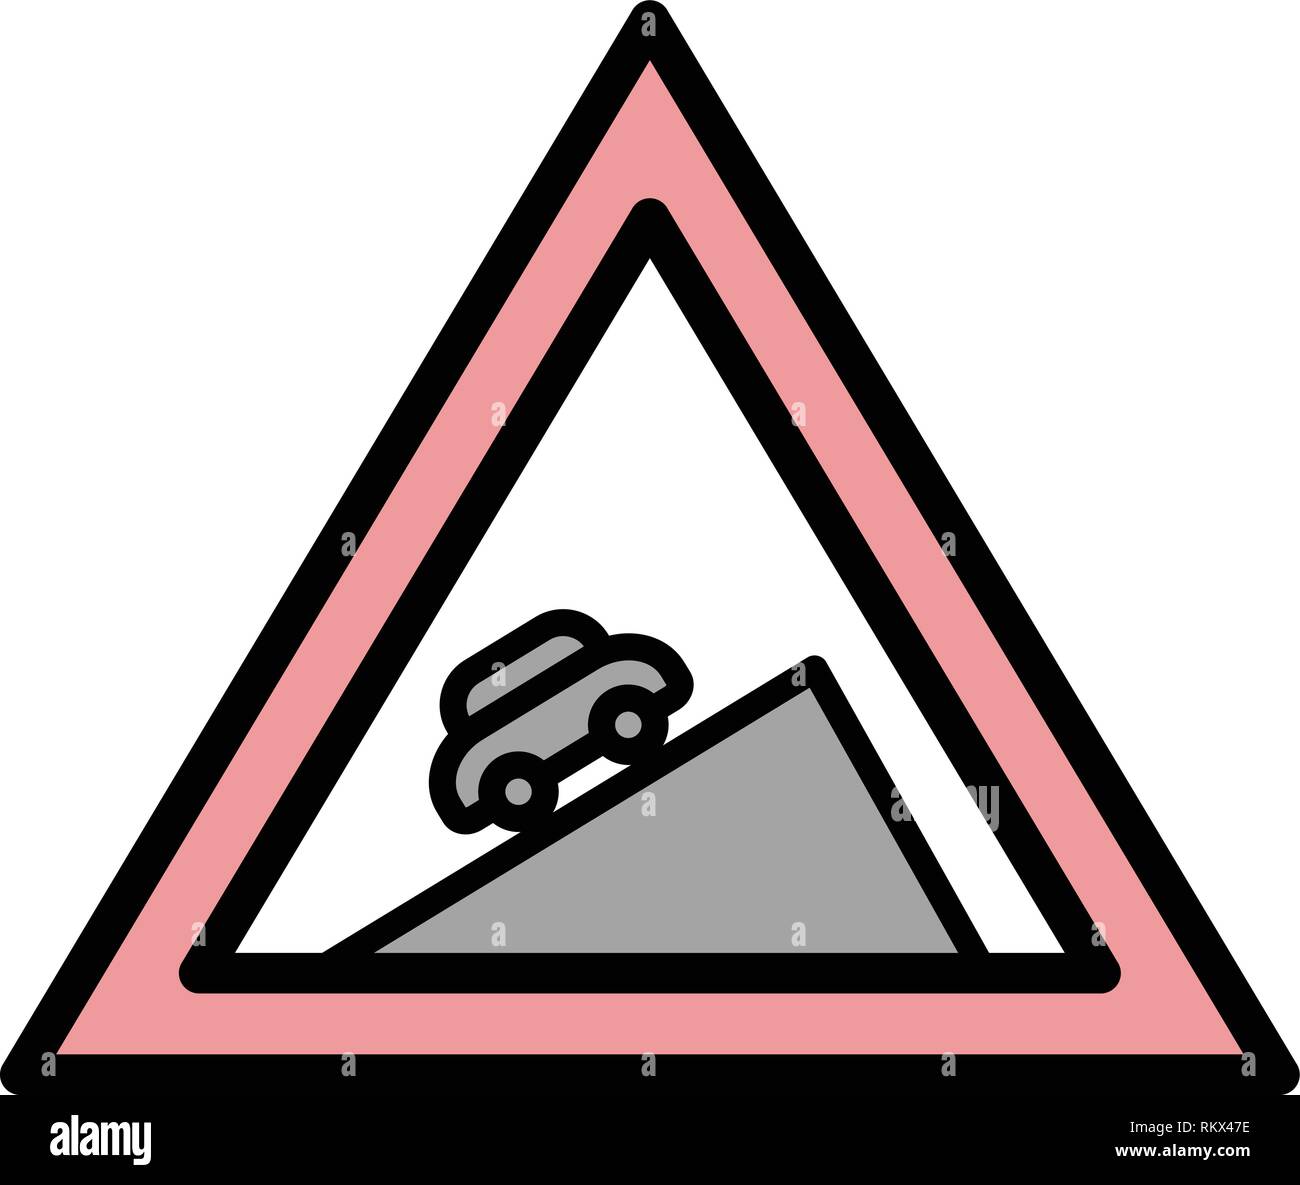 Steep Ascent Traffic Sign Stock Illustrations – 392 Steep Ascent Traffic  Sign Stock Illustrations, Vectors & Clipart - Dreamstime